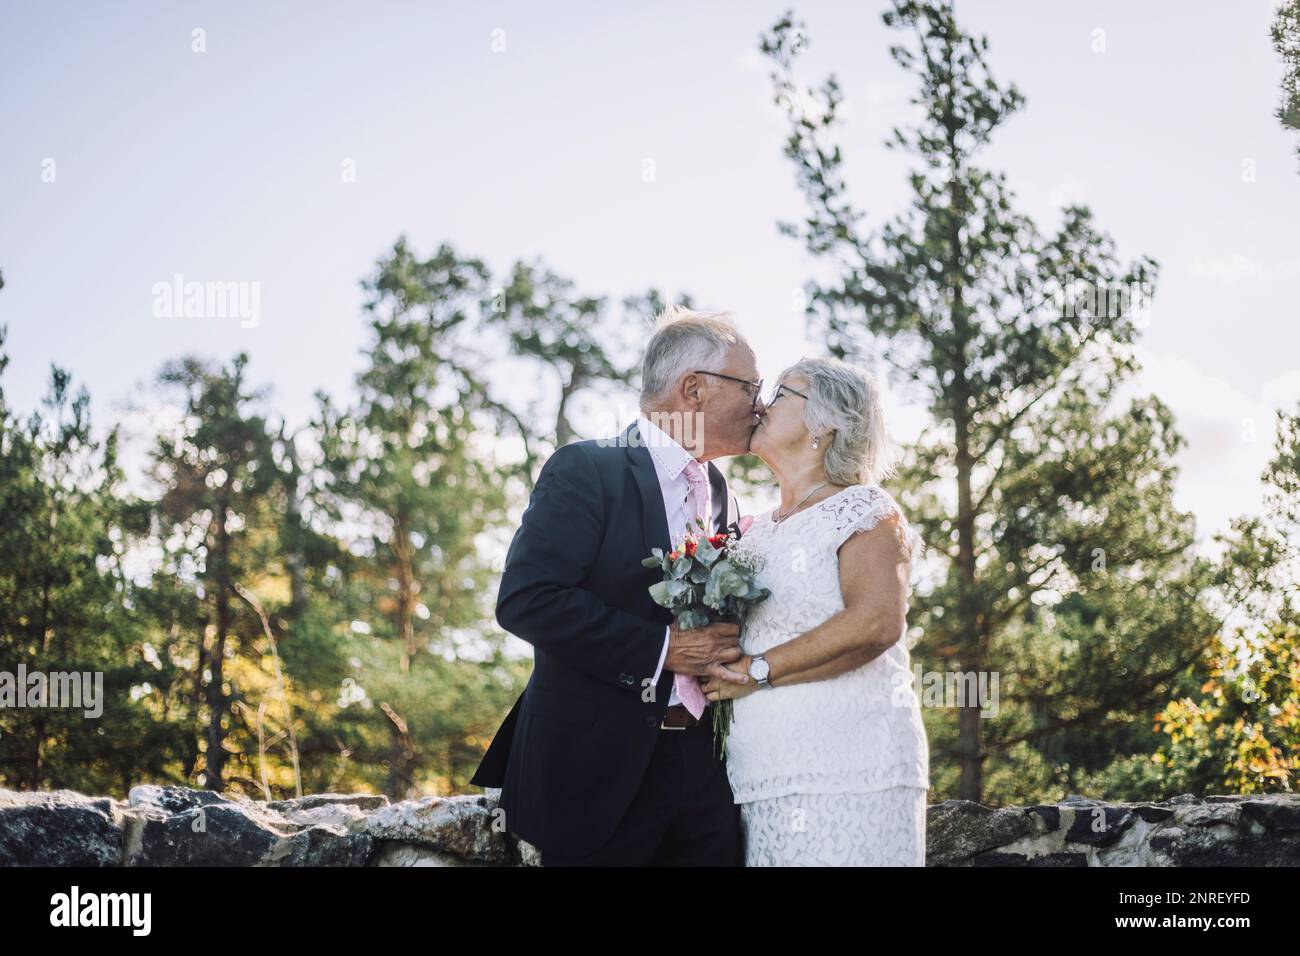 Affectionate newlywed senior couple kissing on mouth against forest on wedding day Stock Photo